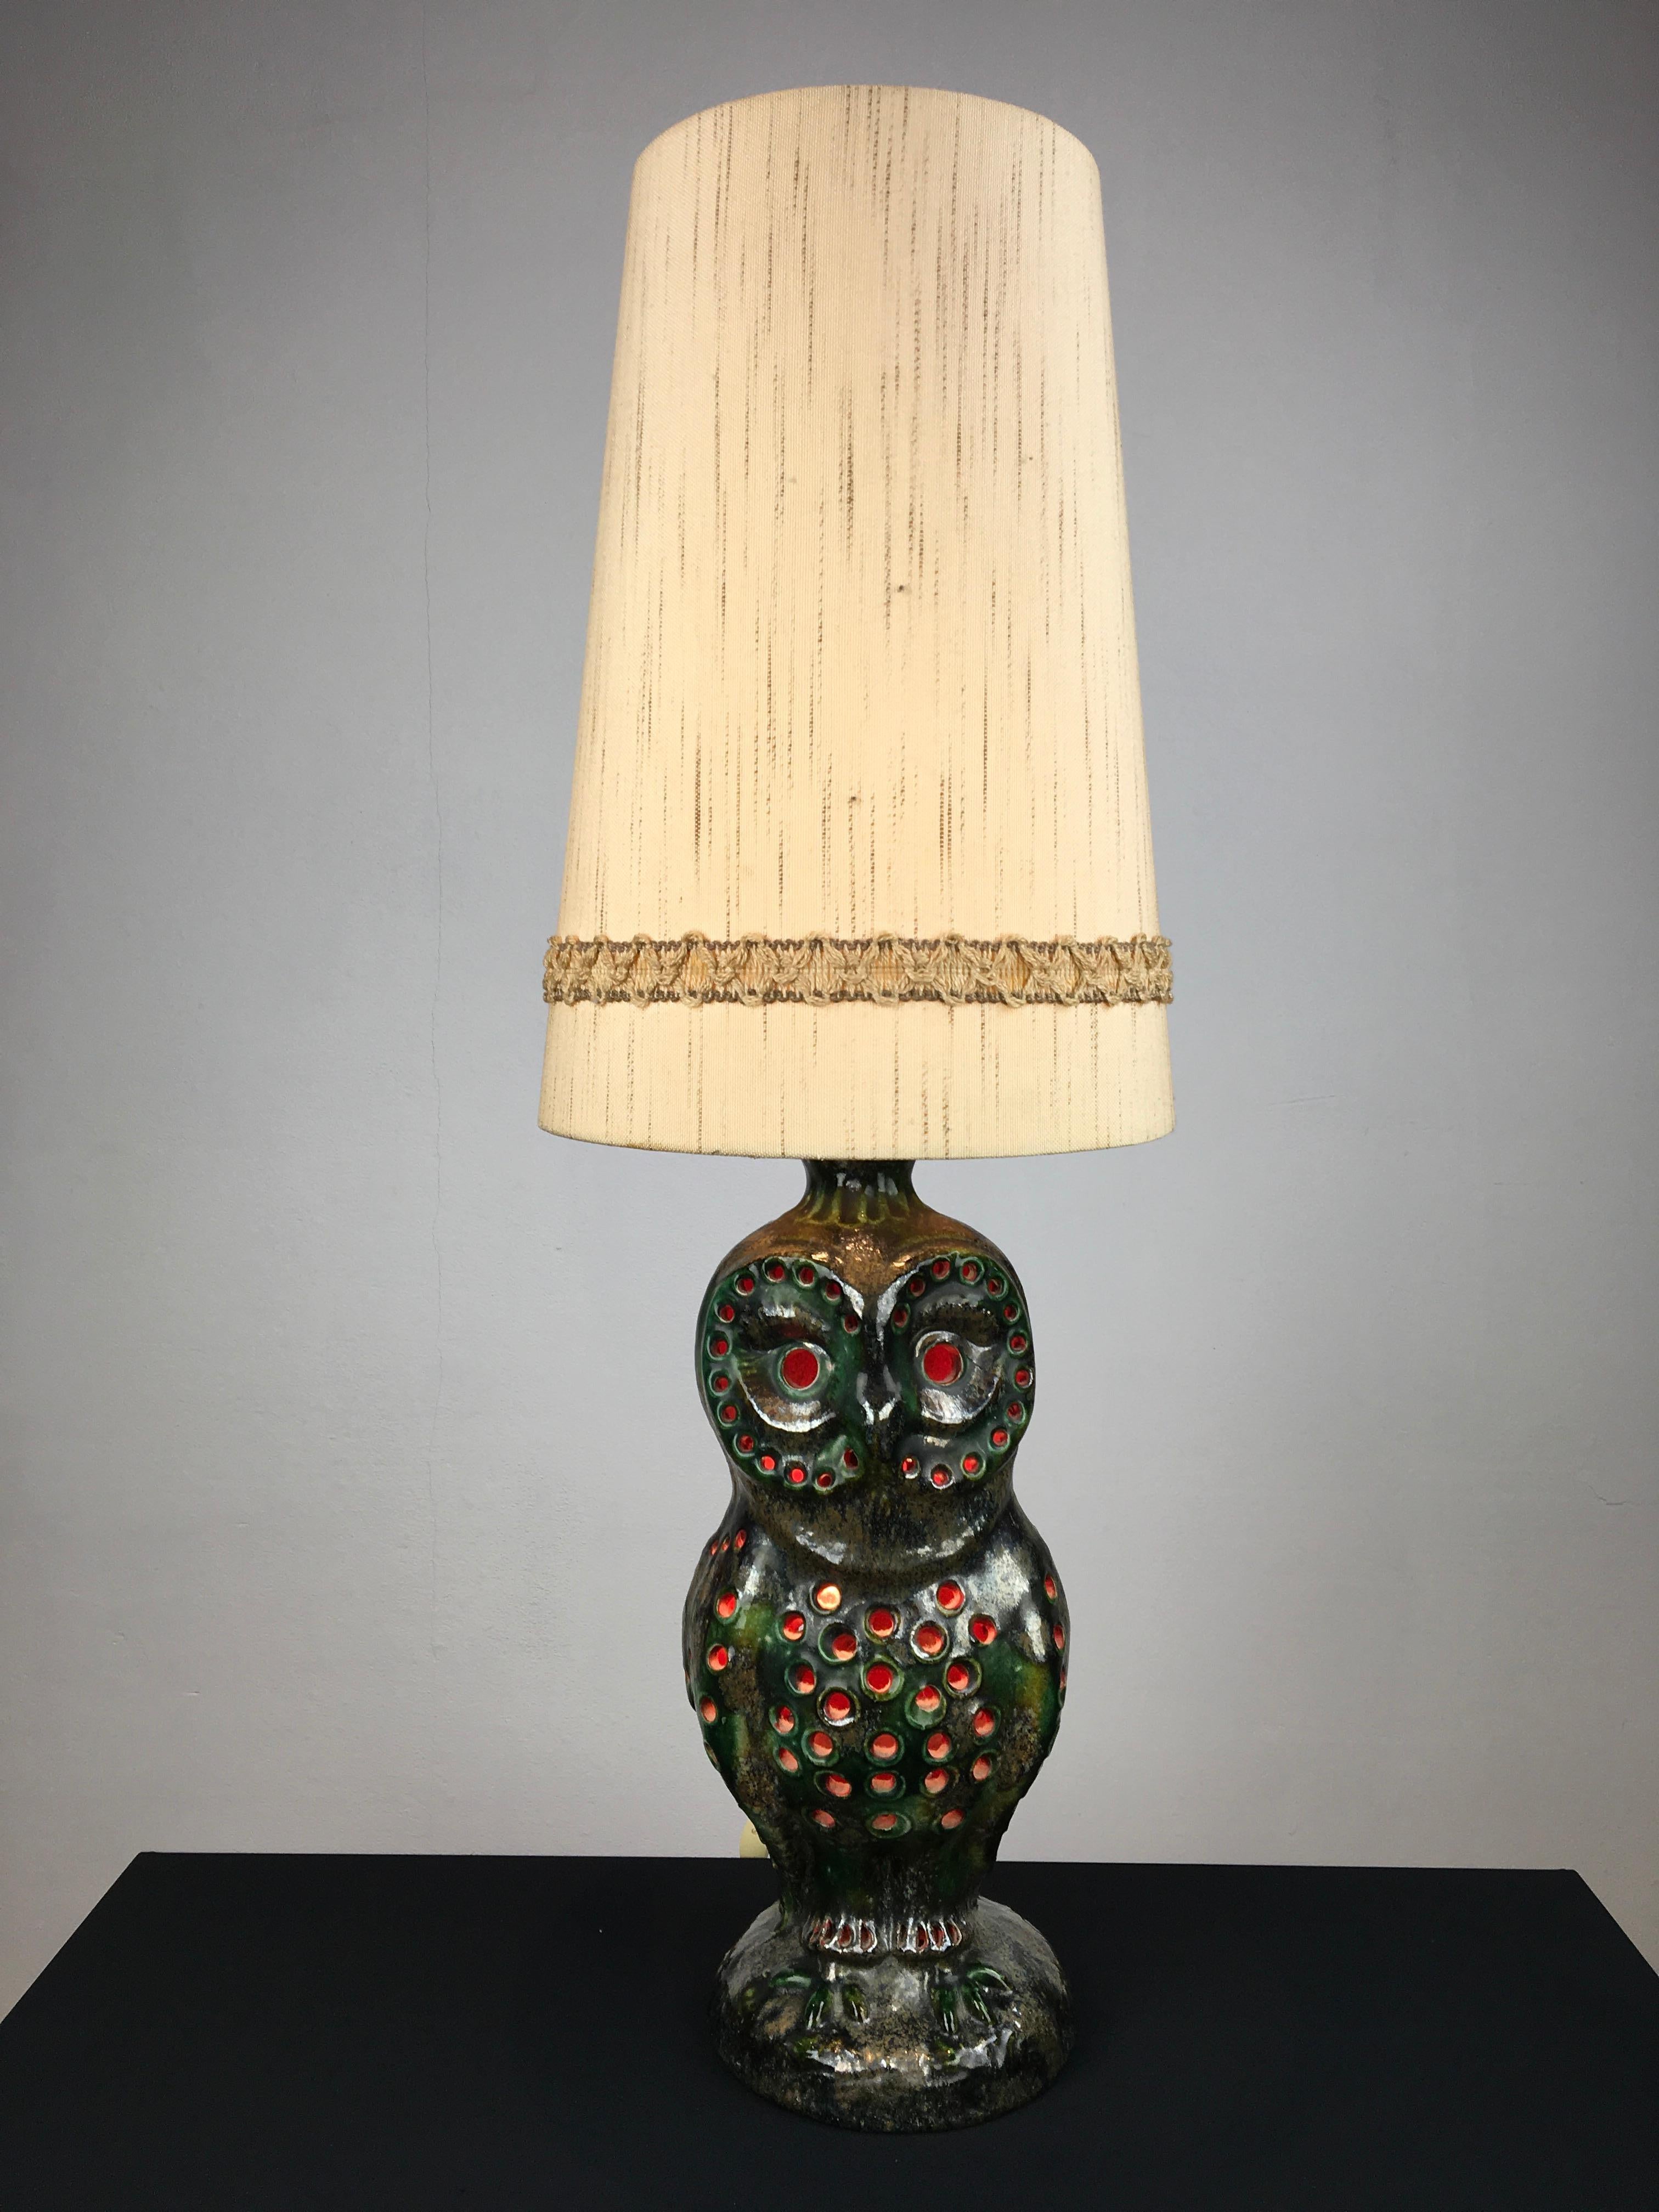 1970s ceramic owl table lamp.
This large vintage ceramic table lamp is in the shape of an owl and was made in Germany. This bird light has the colors green, brown, orange and a gold, bronze with silver touch. It has 2 fittings for E27 bulbs: 1 on